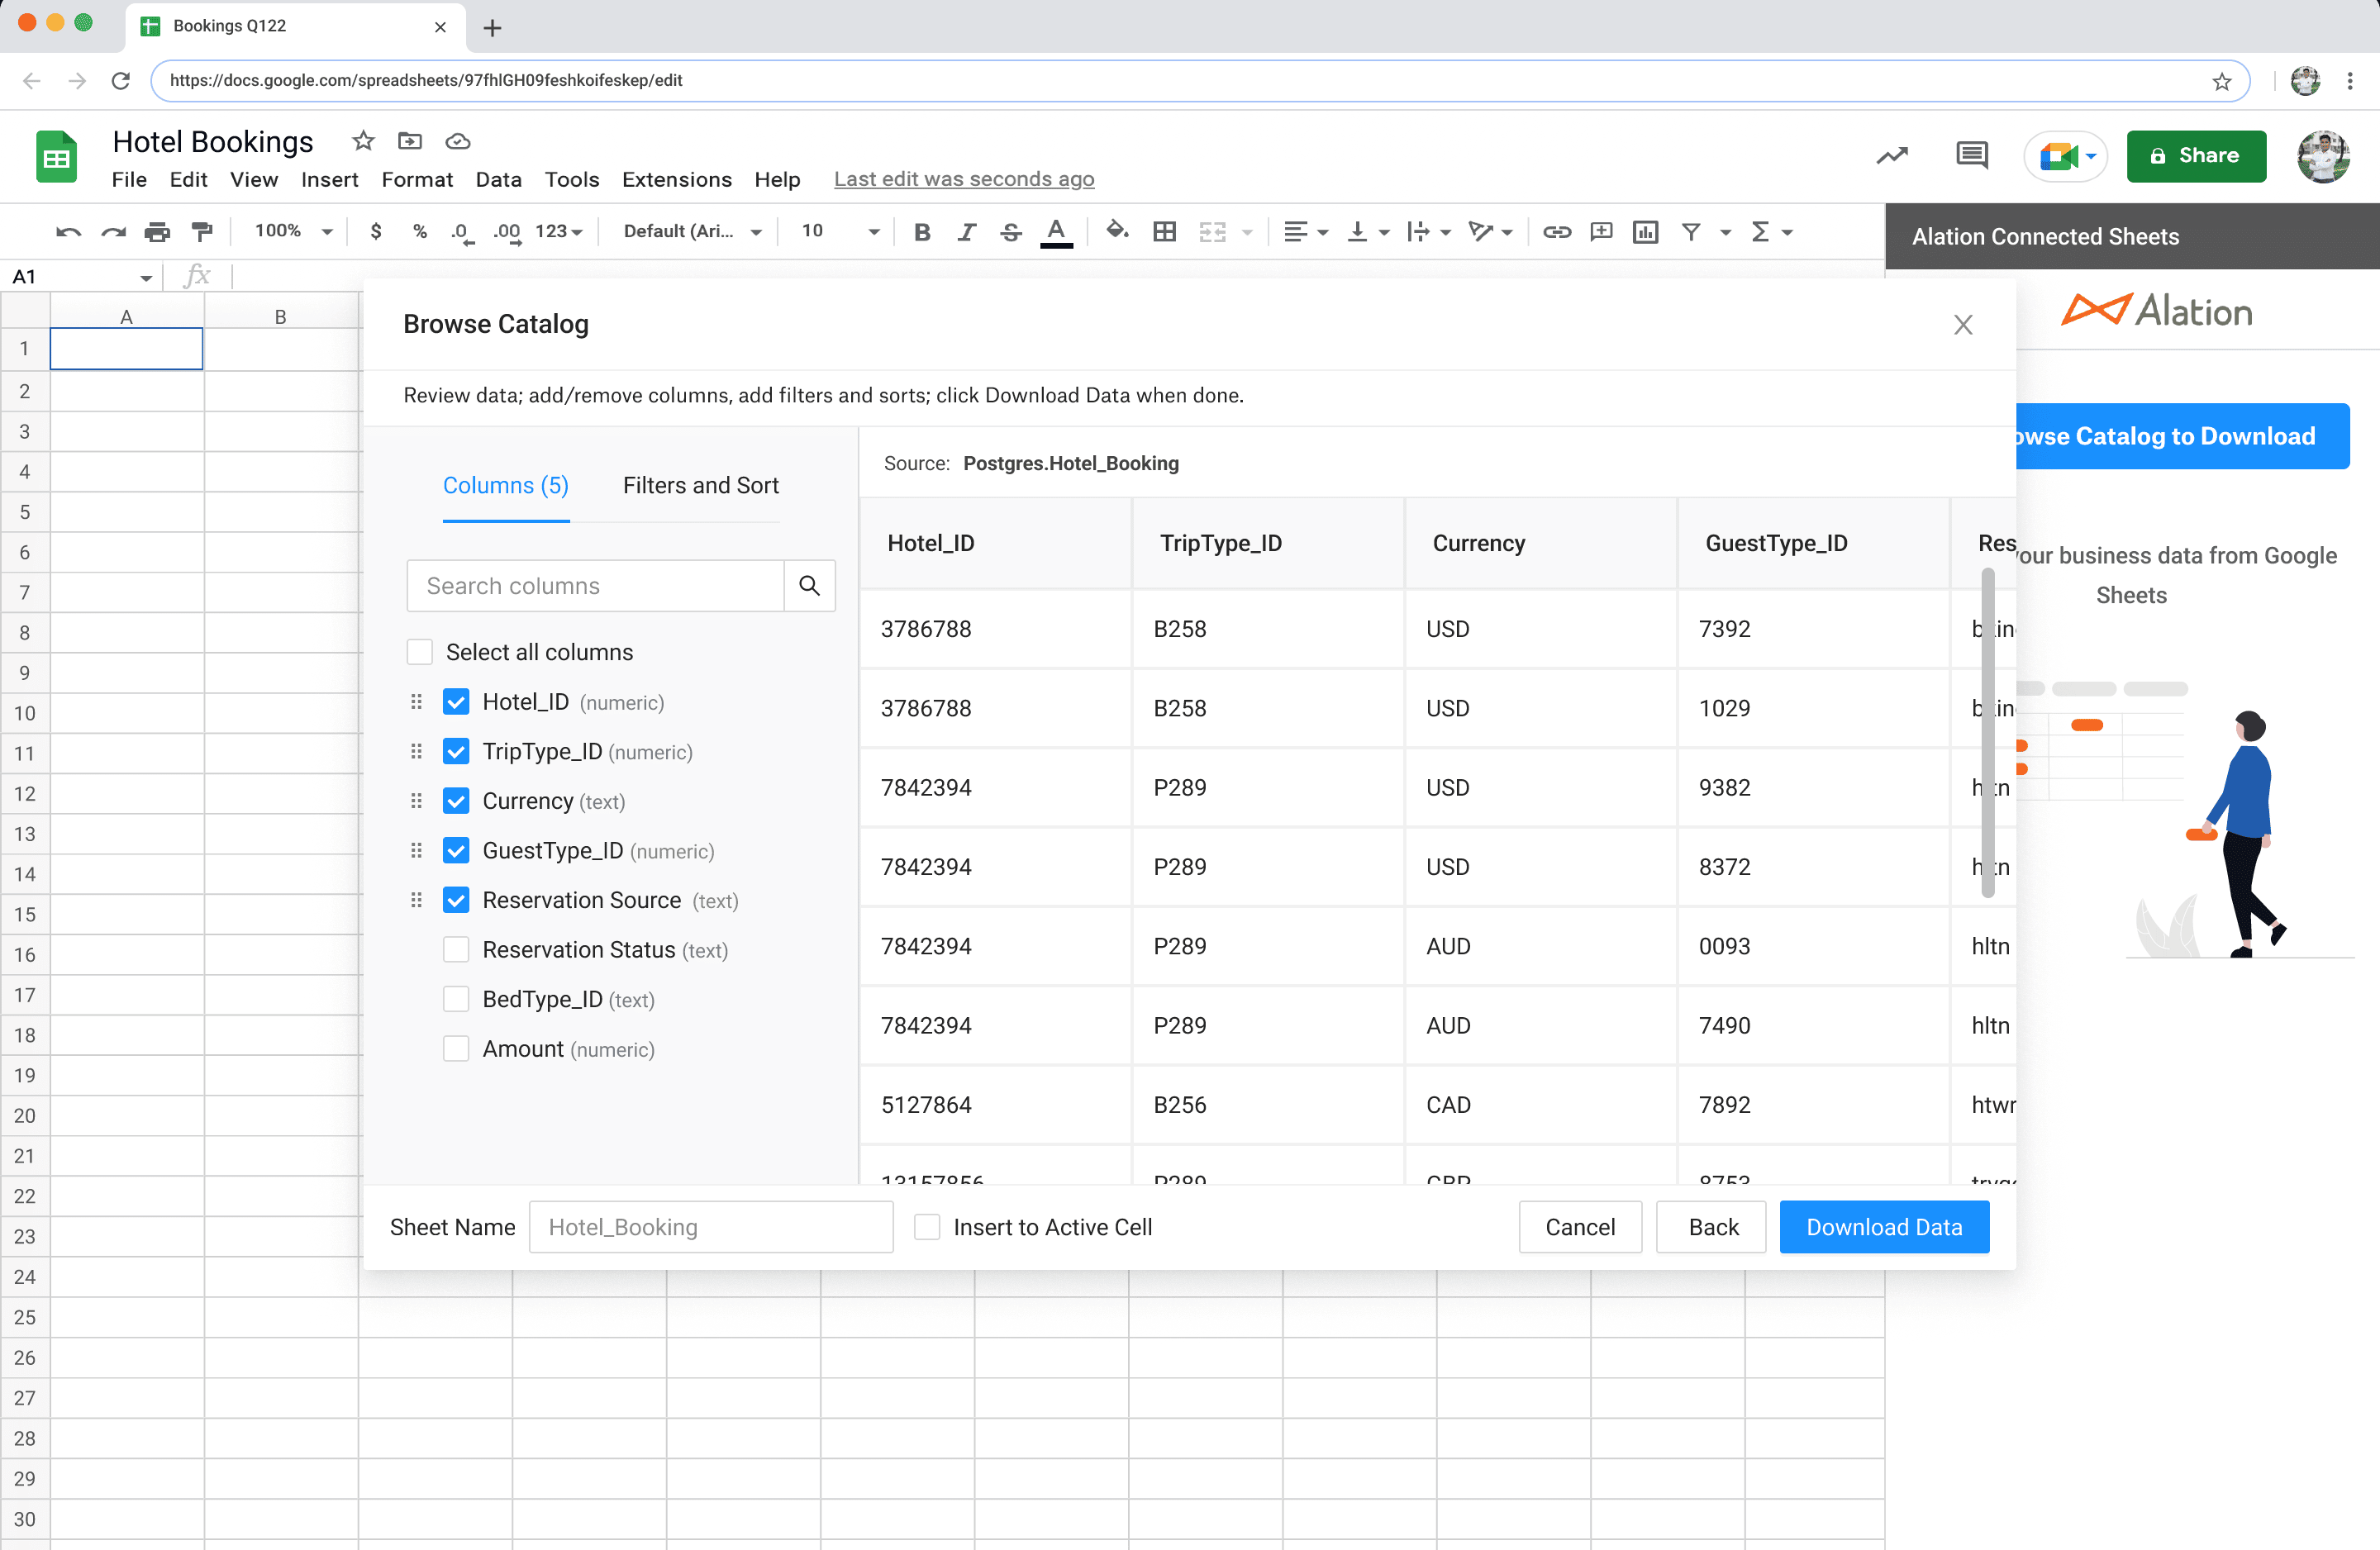 Example screenshot of Alation Connected Sheets user experience in Google Sheets interface.